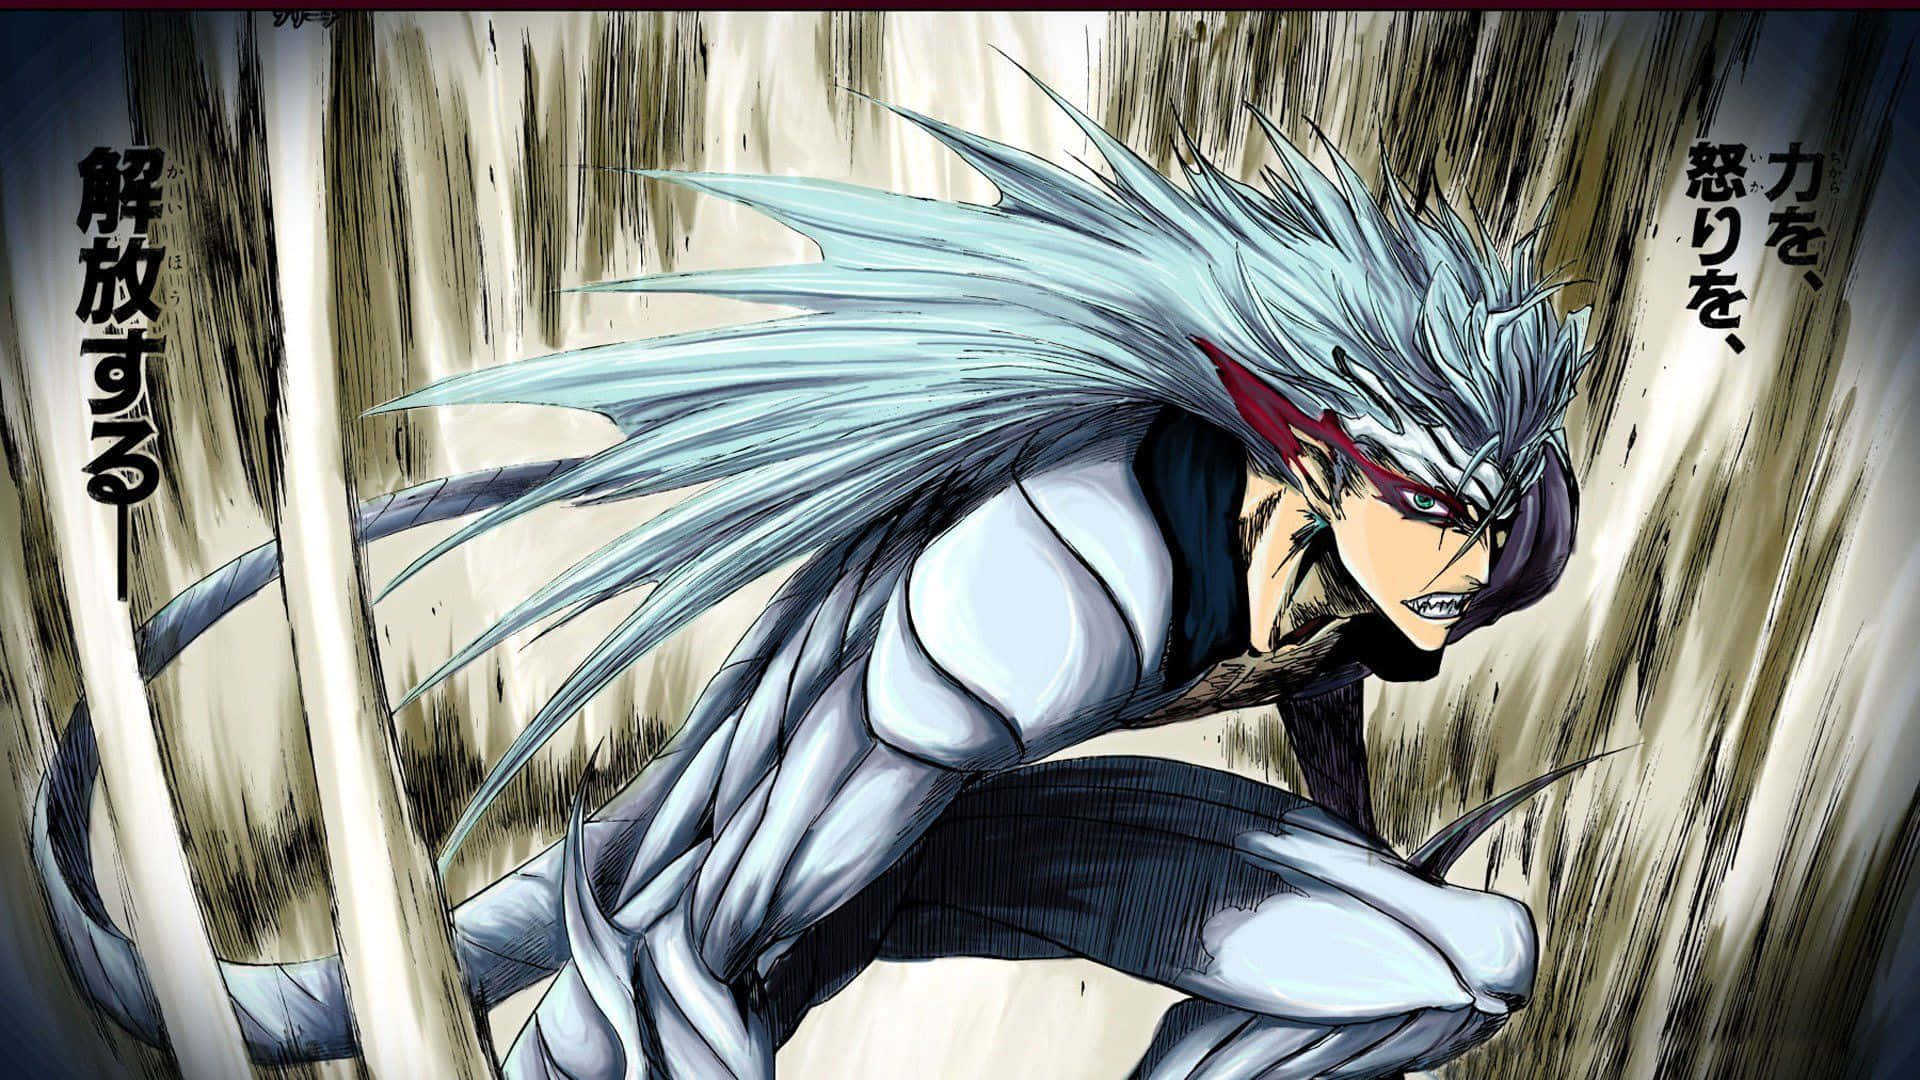 Grimmjow Jaegerjaquez is ready for action Wallpaper